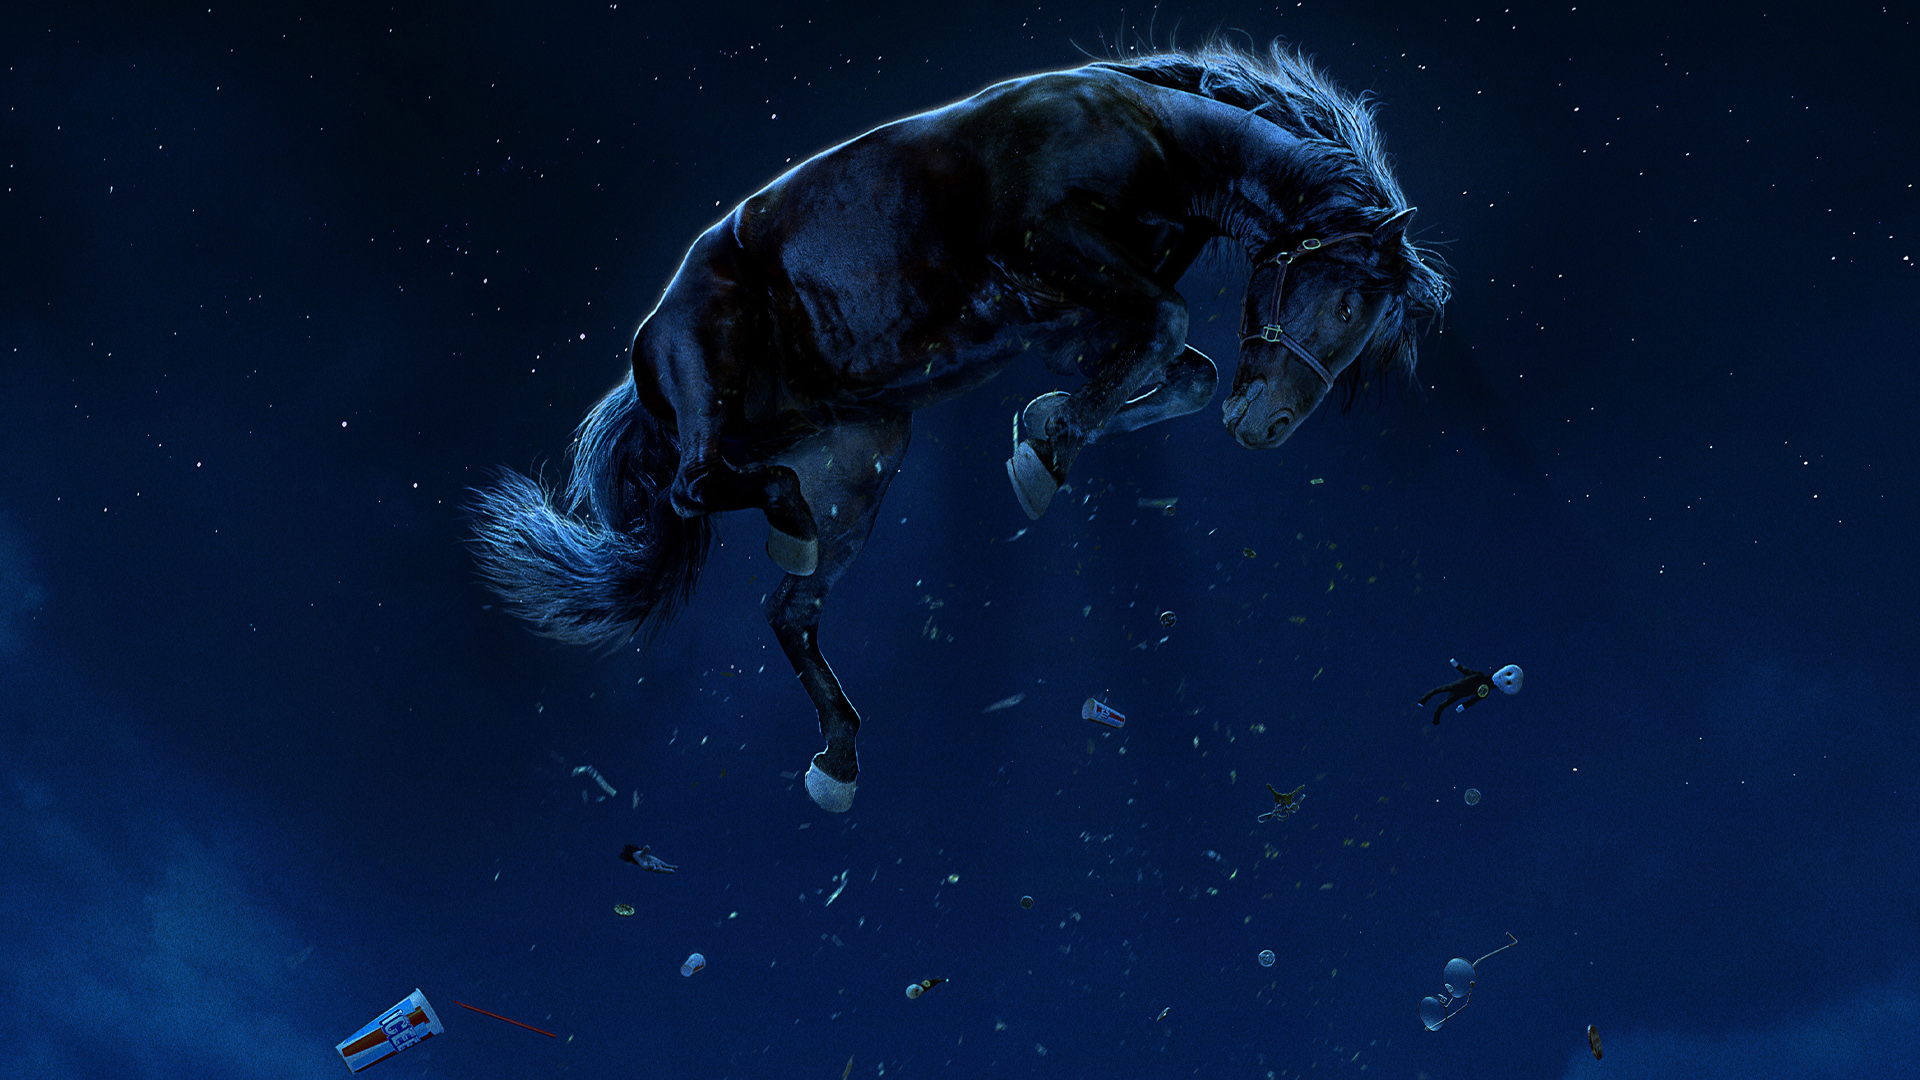 Against a dark blue sky, a horse floats upwards as if being pulled towards the top of the image